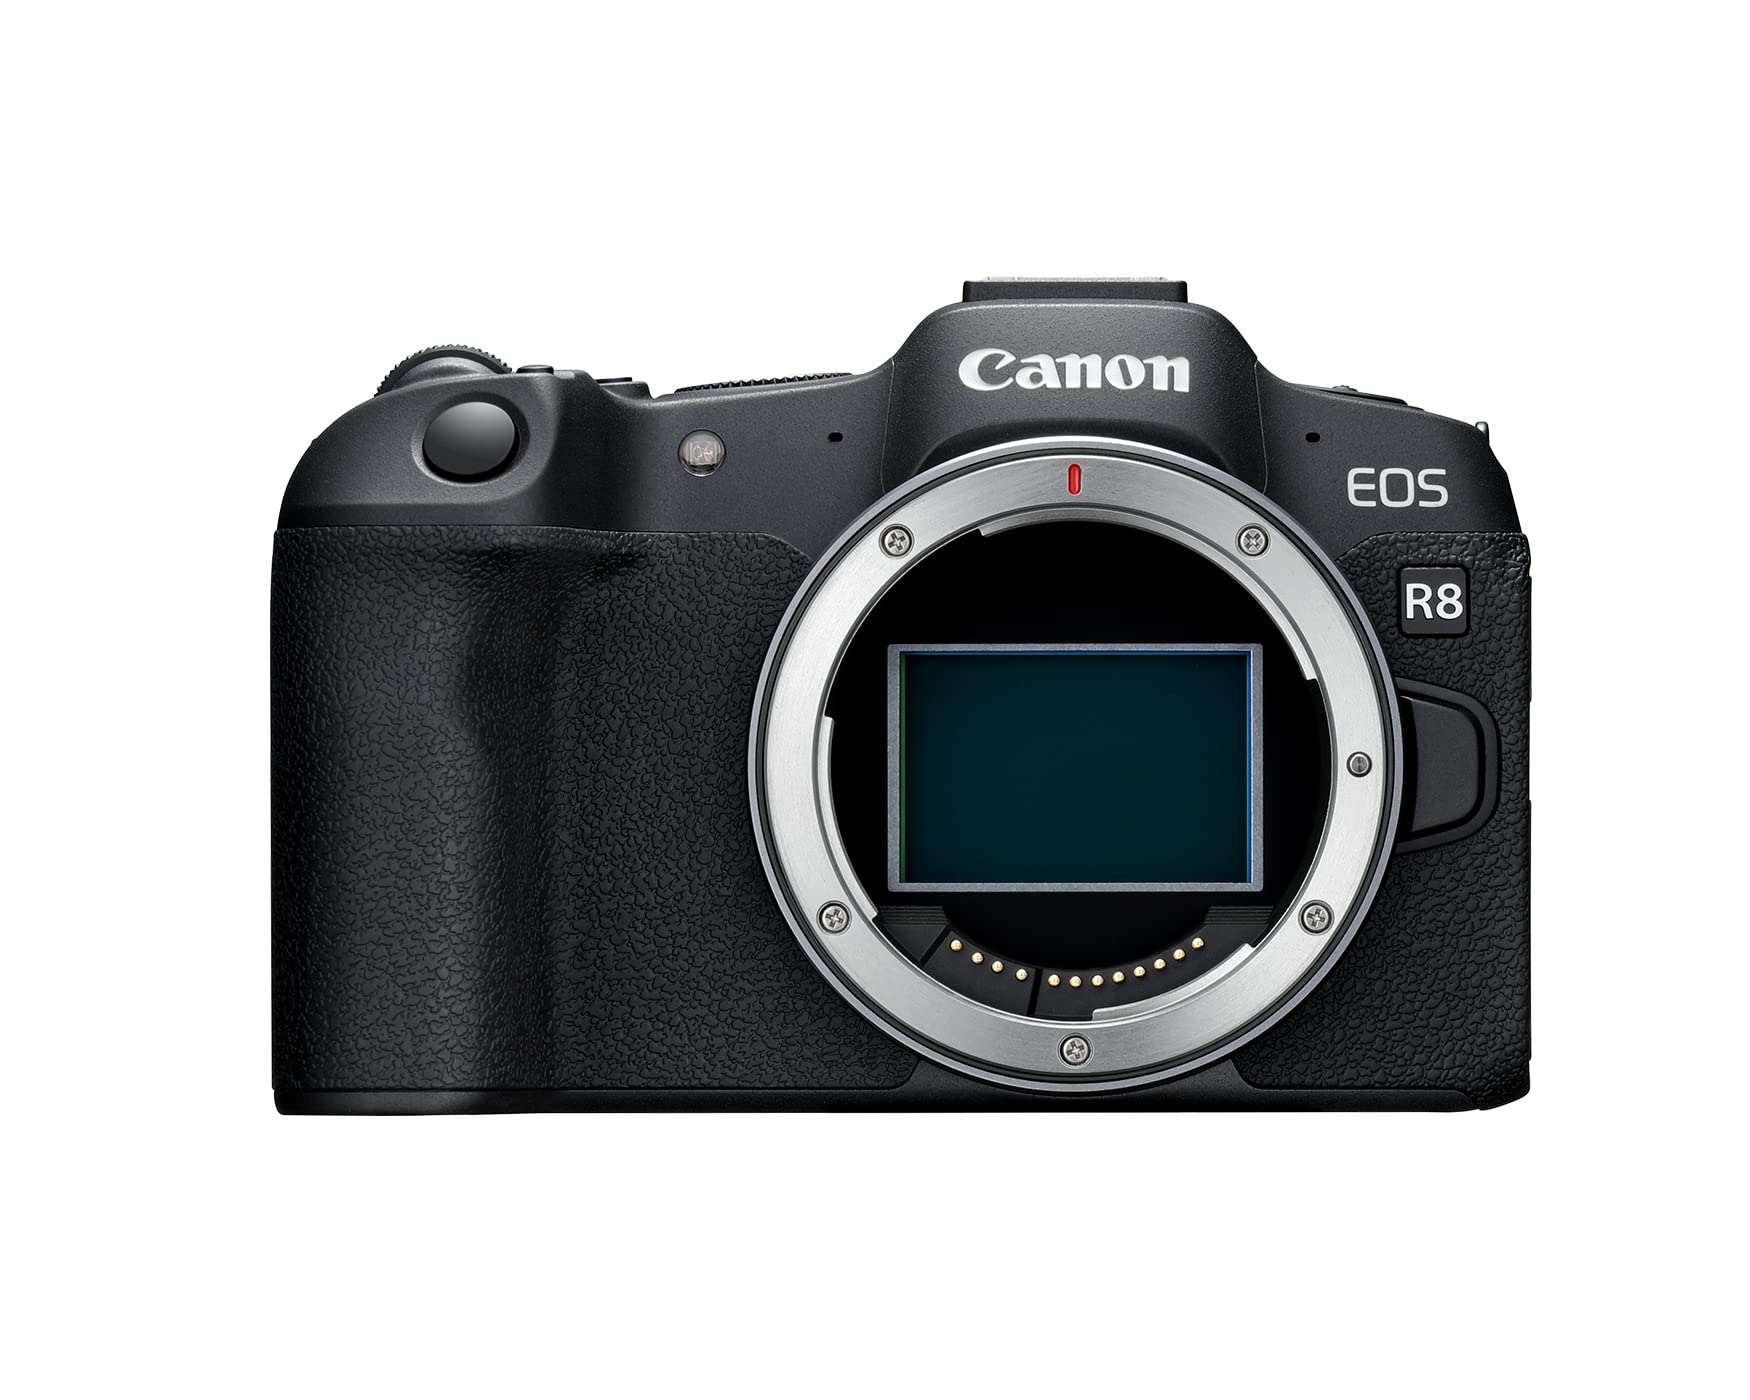 Canon - EOS R8 4K Video Mirrorless Camera Body Only - Black $1200